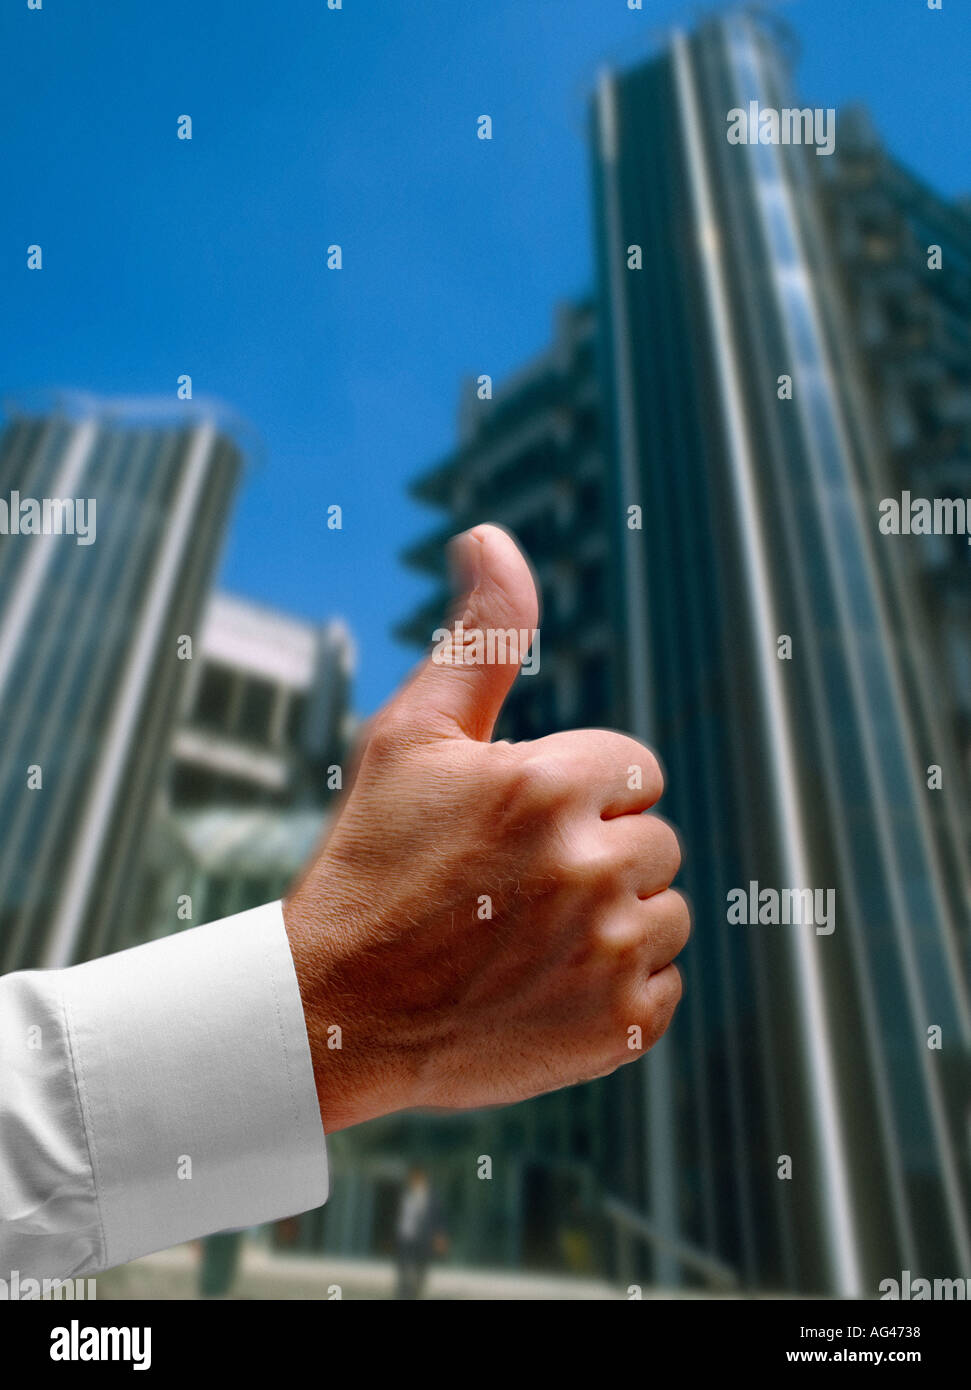 Thumbs up and high finance building for success and progress Stock Photo